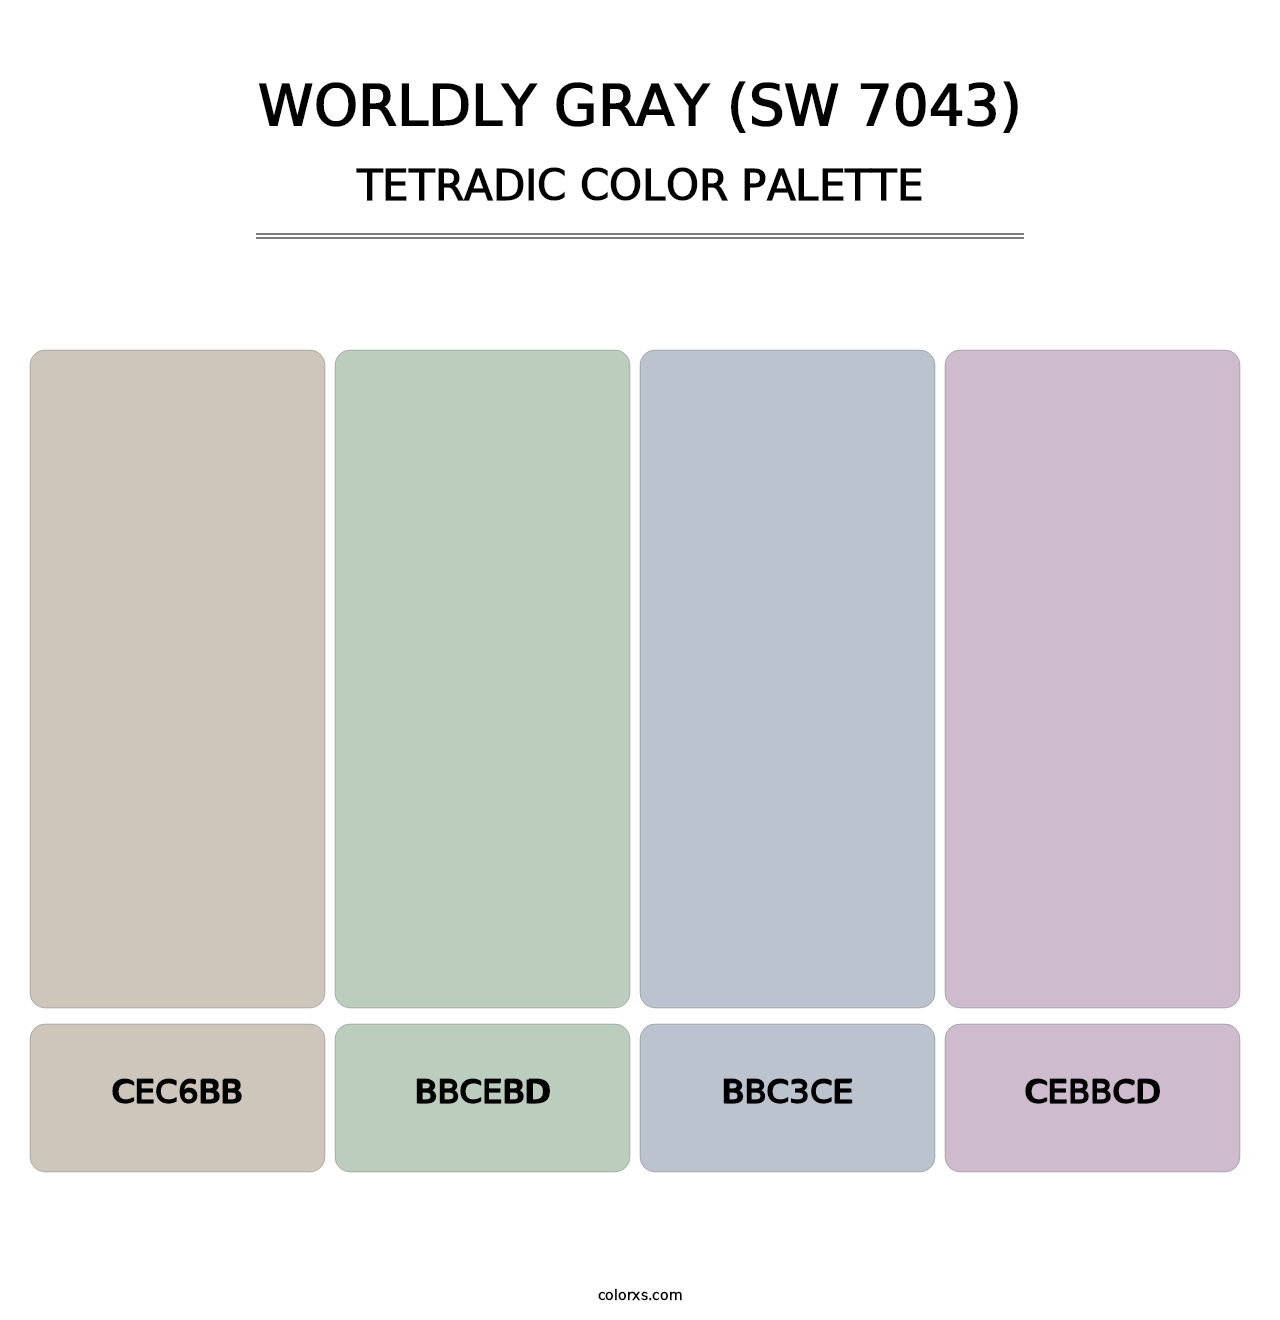 Worldly Gray (SW 7043) - Tetradic Color Palette